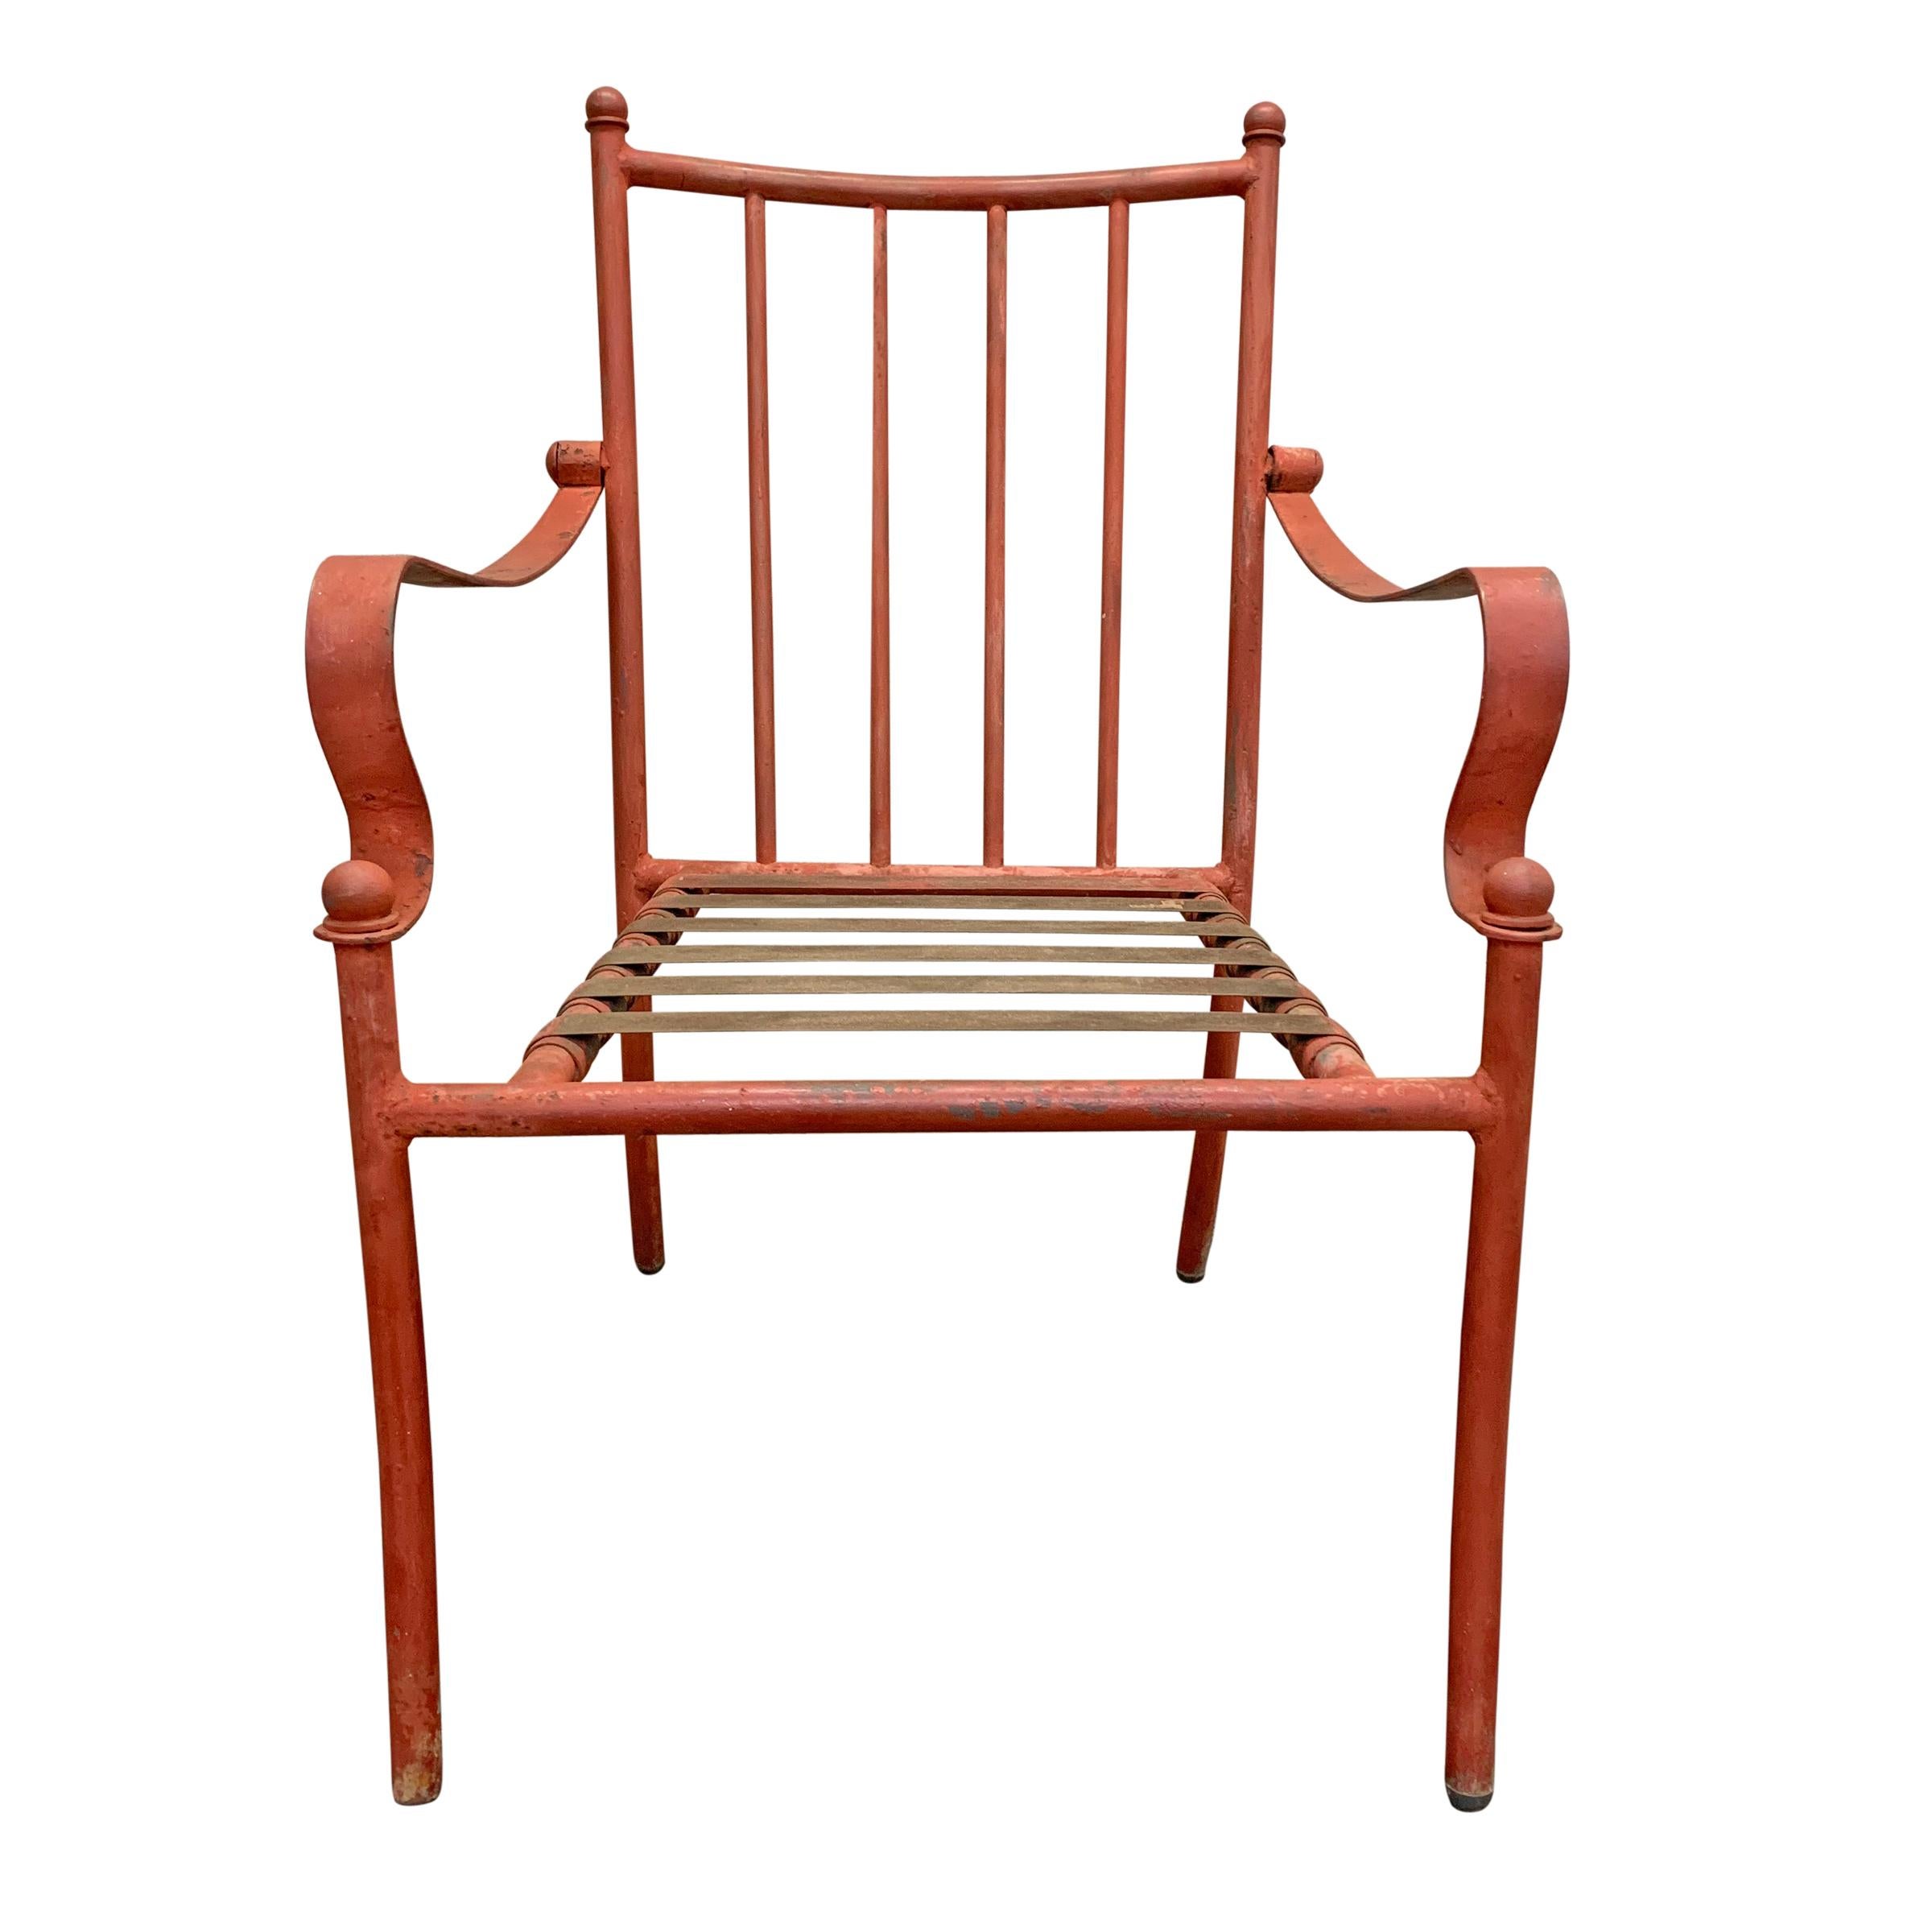 A wonderful set of four mid-20th century American iron frame patio chairs with fantastic scrolled arms, and tubular frames. These are really well constructed with solid materials and excellent attention to detail. We have plans to have these